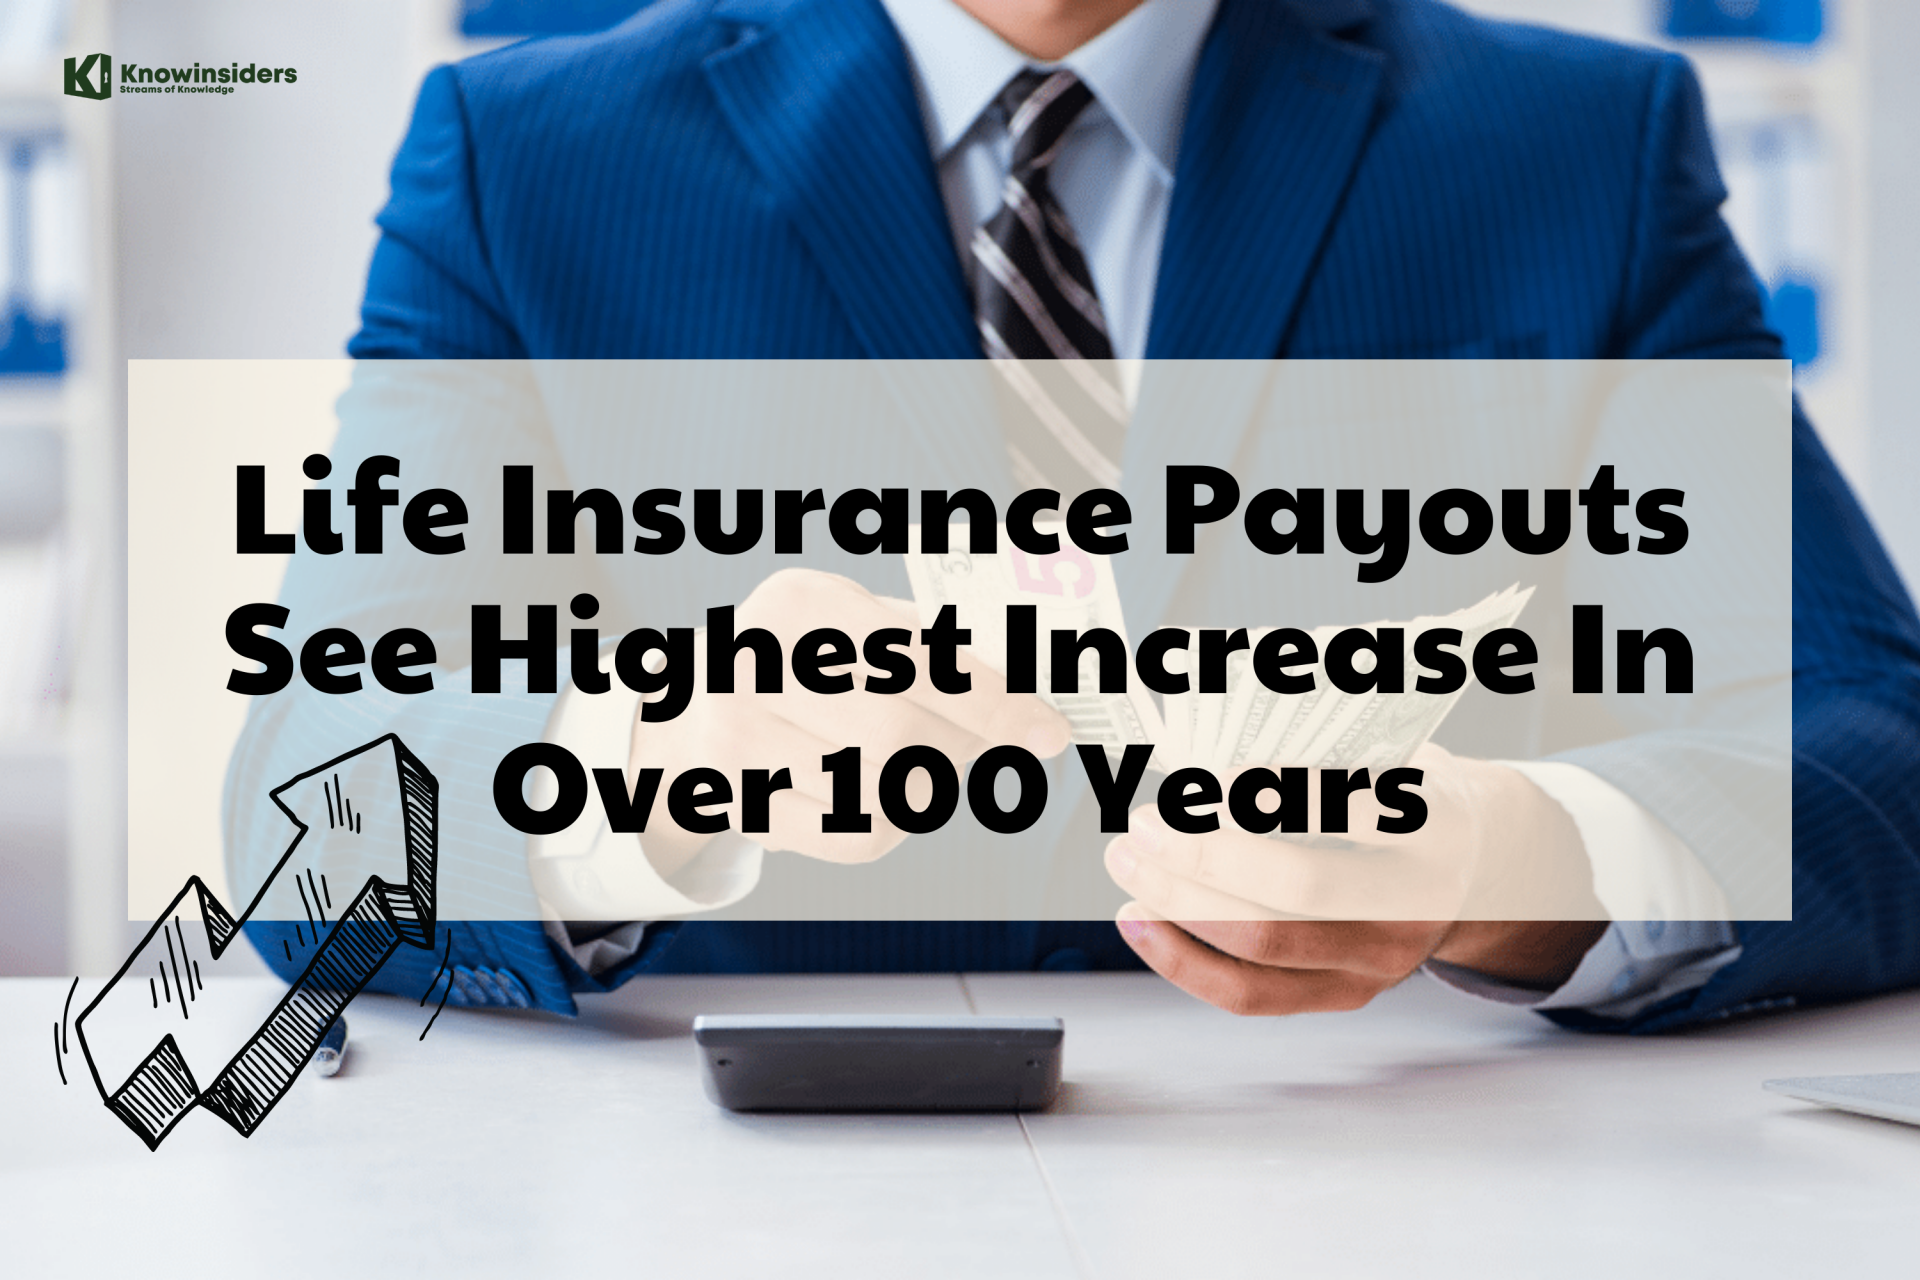 Life Insurance Payouts See Highest Increase In Over 100 Years